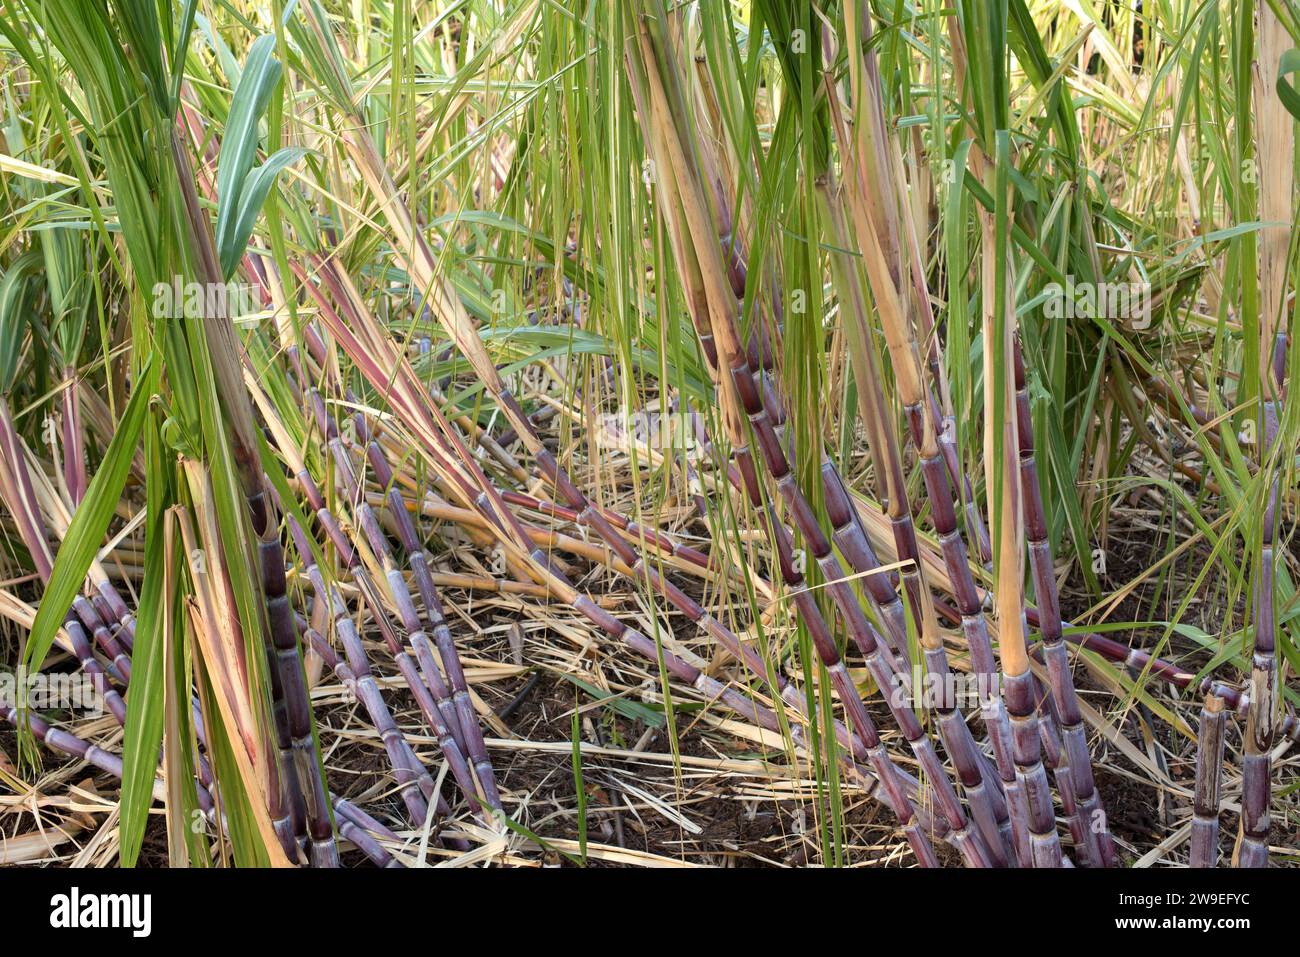 Sugarcane (Saccharum officinarum) is a perennial grass native to New Guinea but cultivated in many tropical regions of the World for its high sugar co Stock Photo